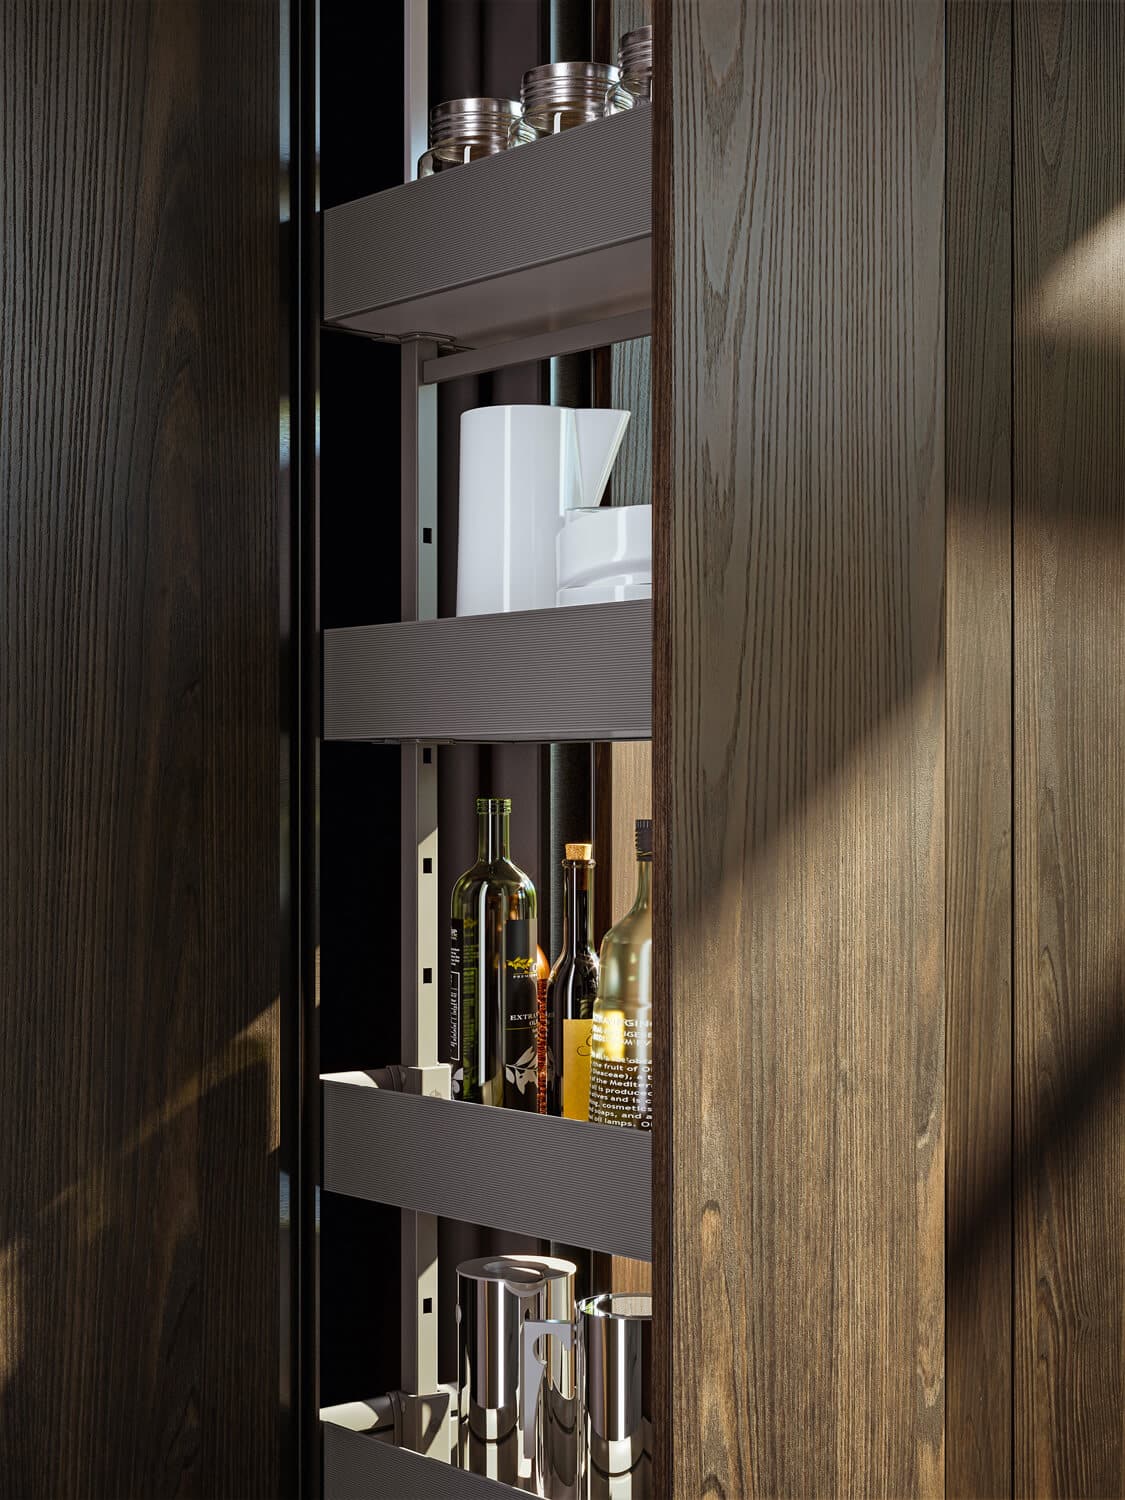 In the columns, the height of the shelves can be adjusted to fit different storage needs.